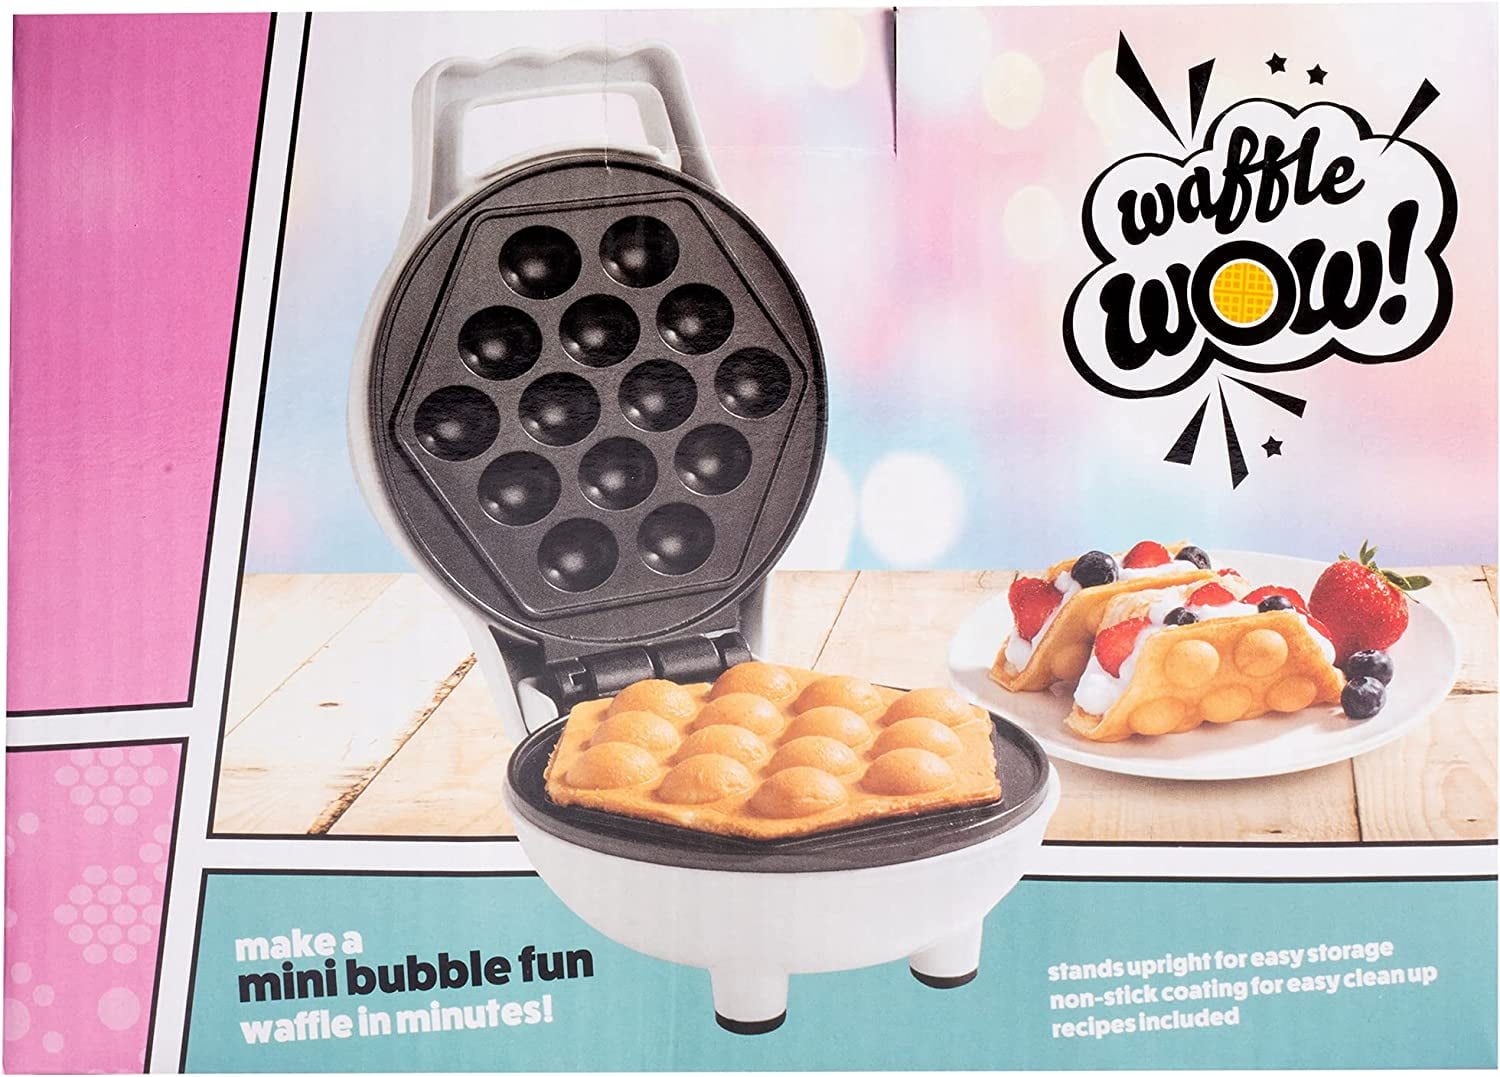 Bubble Waffle Maker- Electric Nonstick Hong Kong Egg Waffler Iron Griddle w  Ready Indicator Light- Ready in under 5 Mins w Recipe Guide- Make Homemade